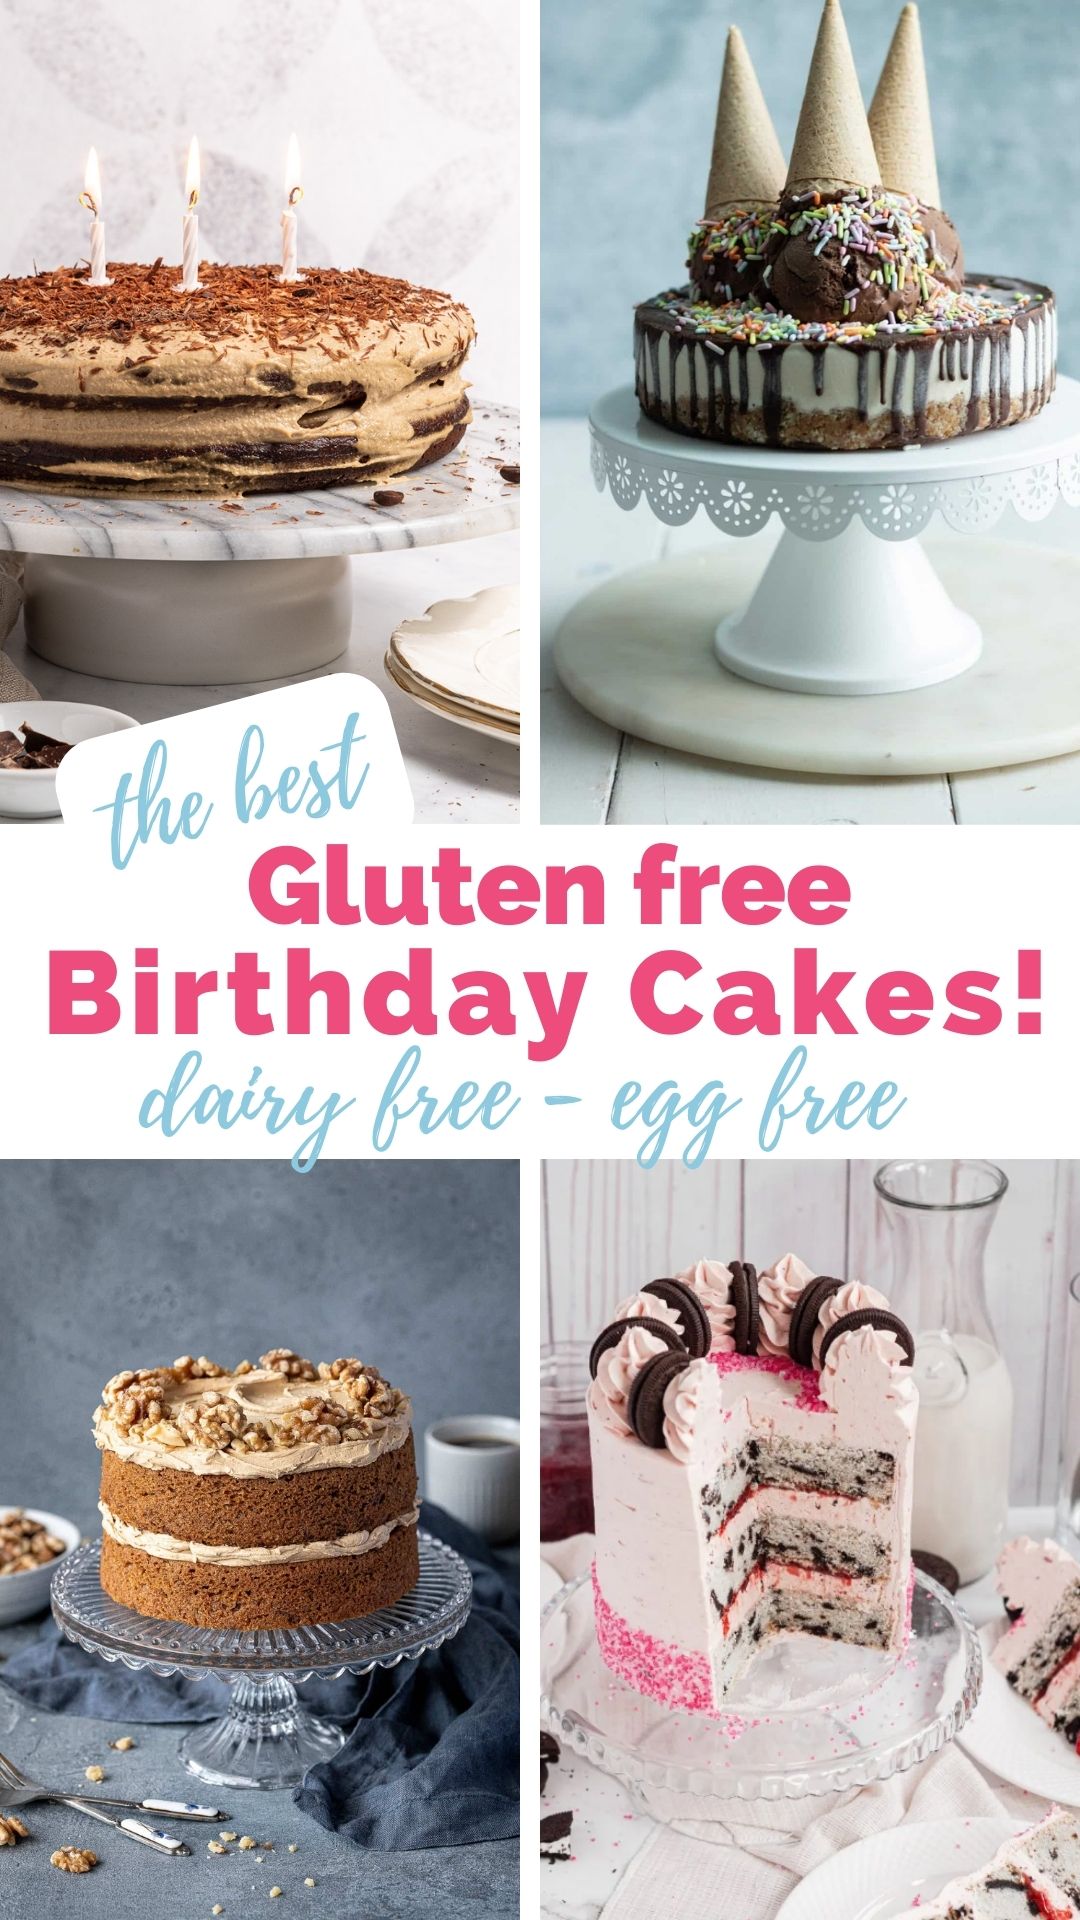 images of gluten free birthday cakes